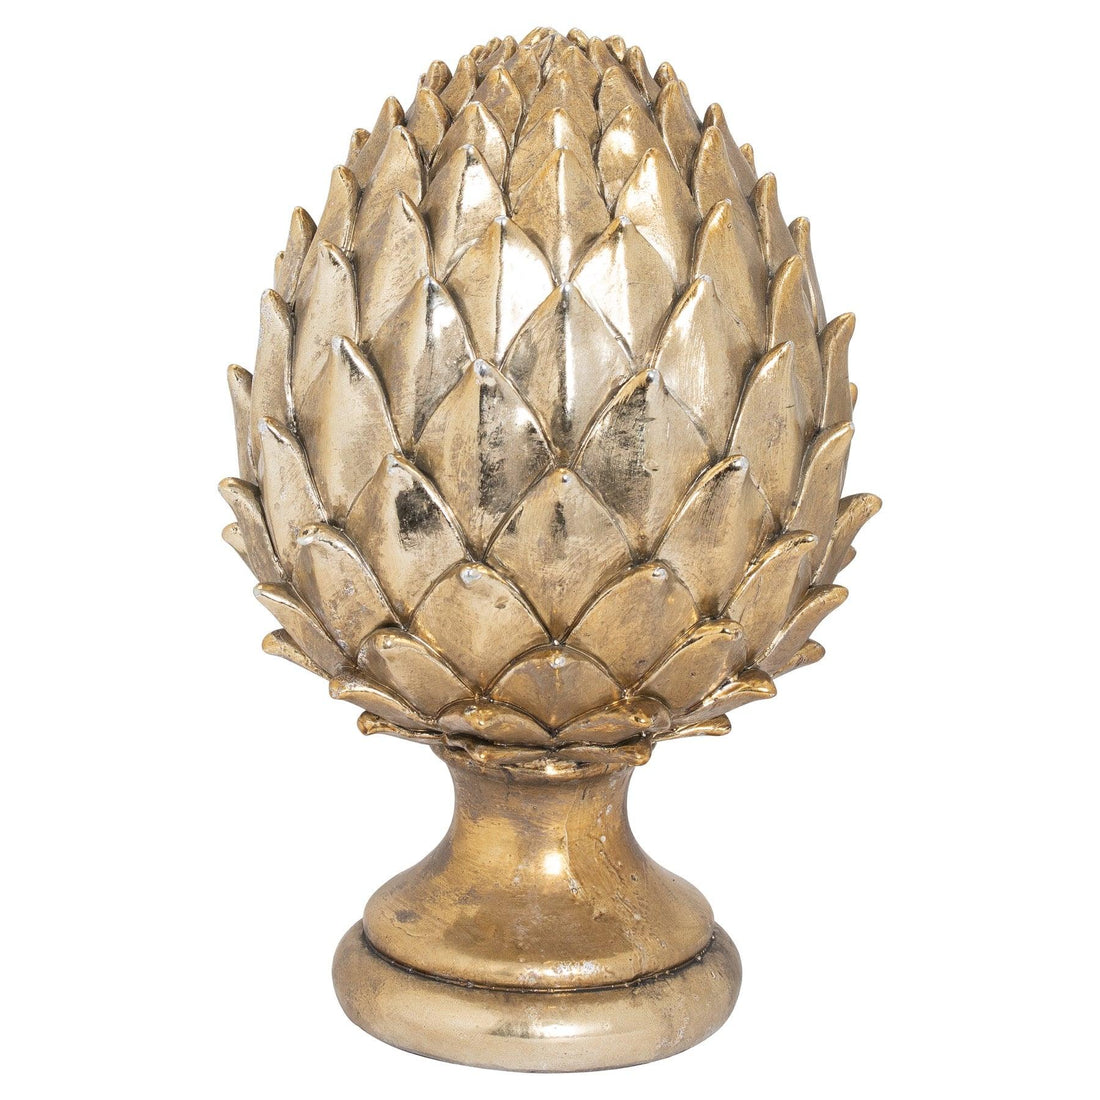 Large Gold Pinecone Finial - £64.95 - Gifts & Accessories > Christmas Decorations > Ornaments 